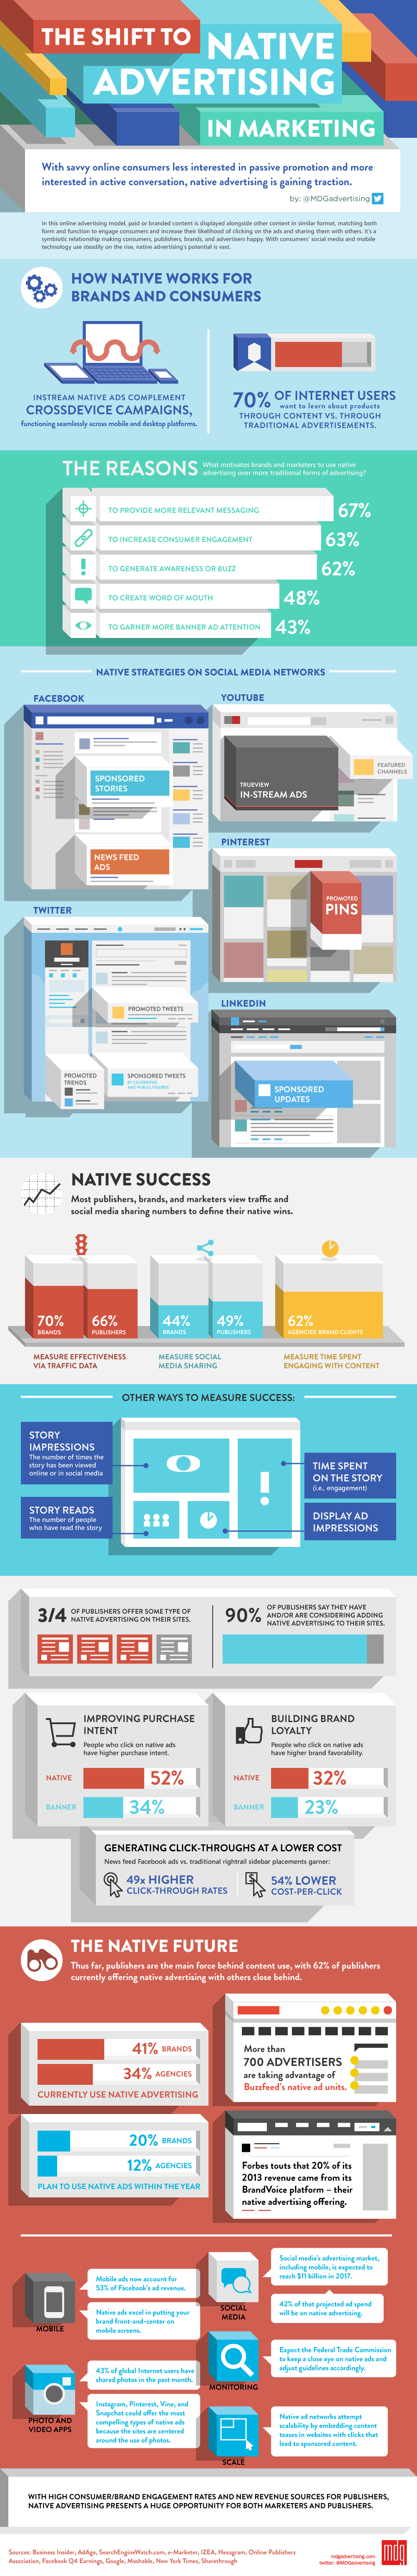 The Shift to Native Advertising